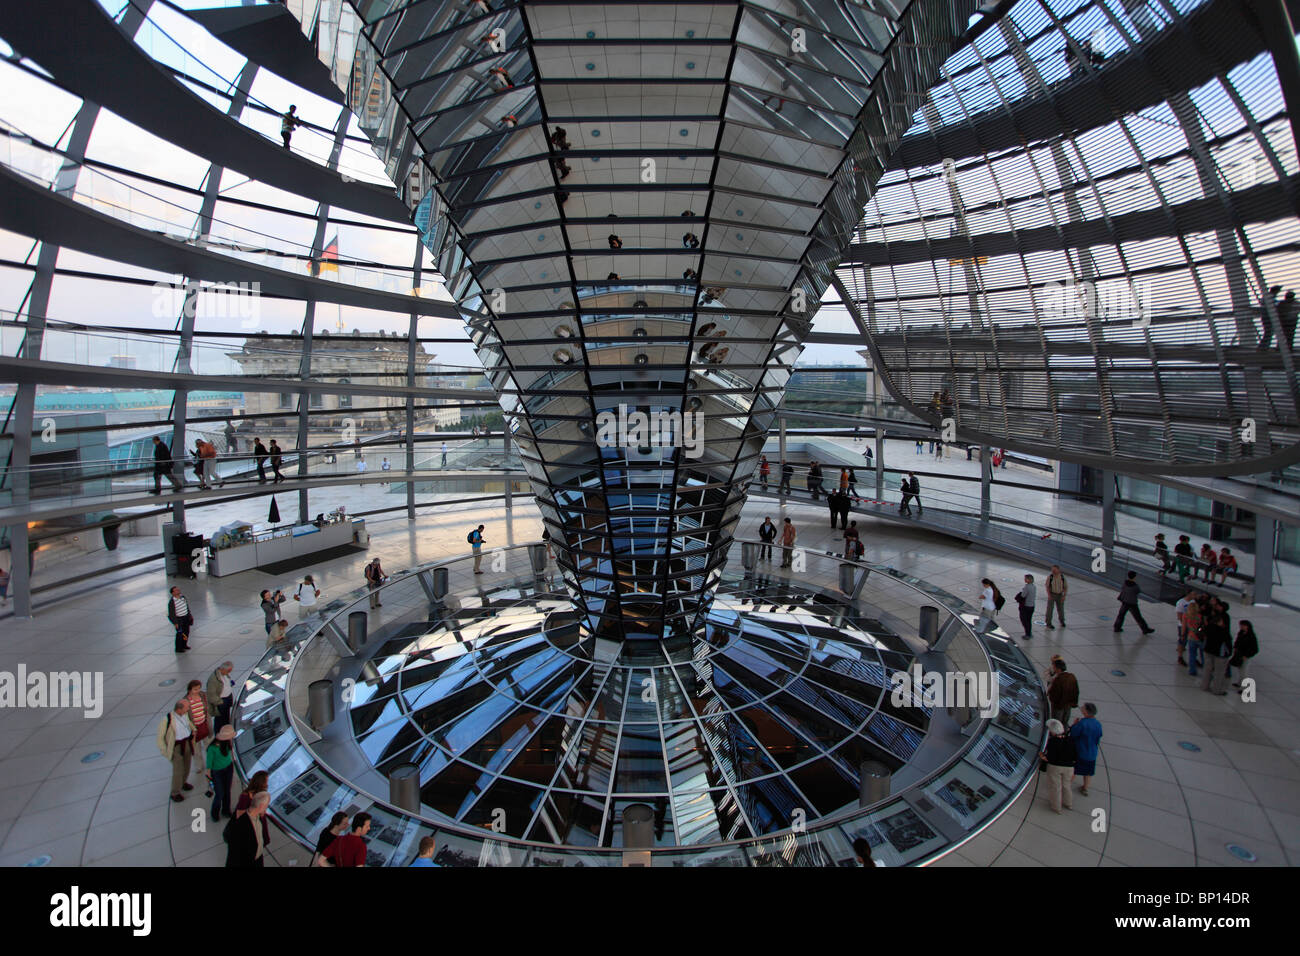 Germany, Berlin, Reichstag, glass dome, cupola, Norman Foster architect Stock Photo